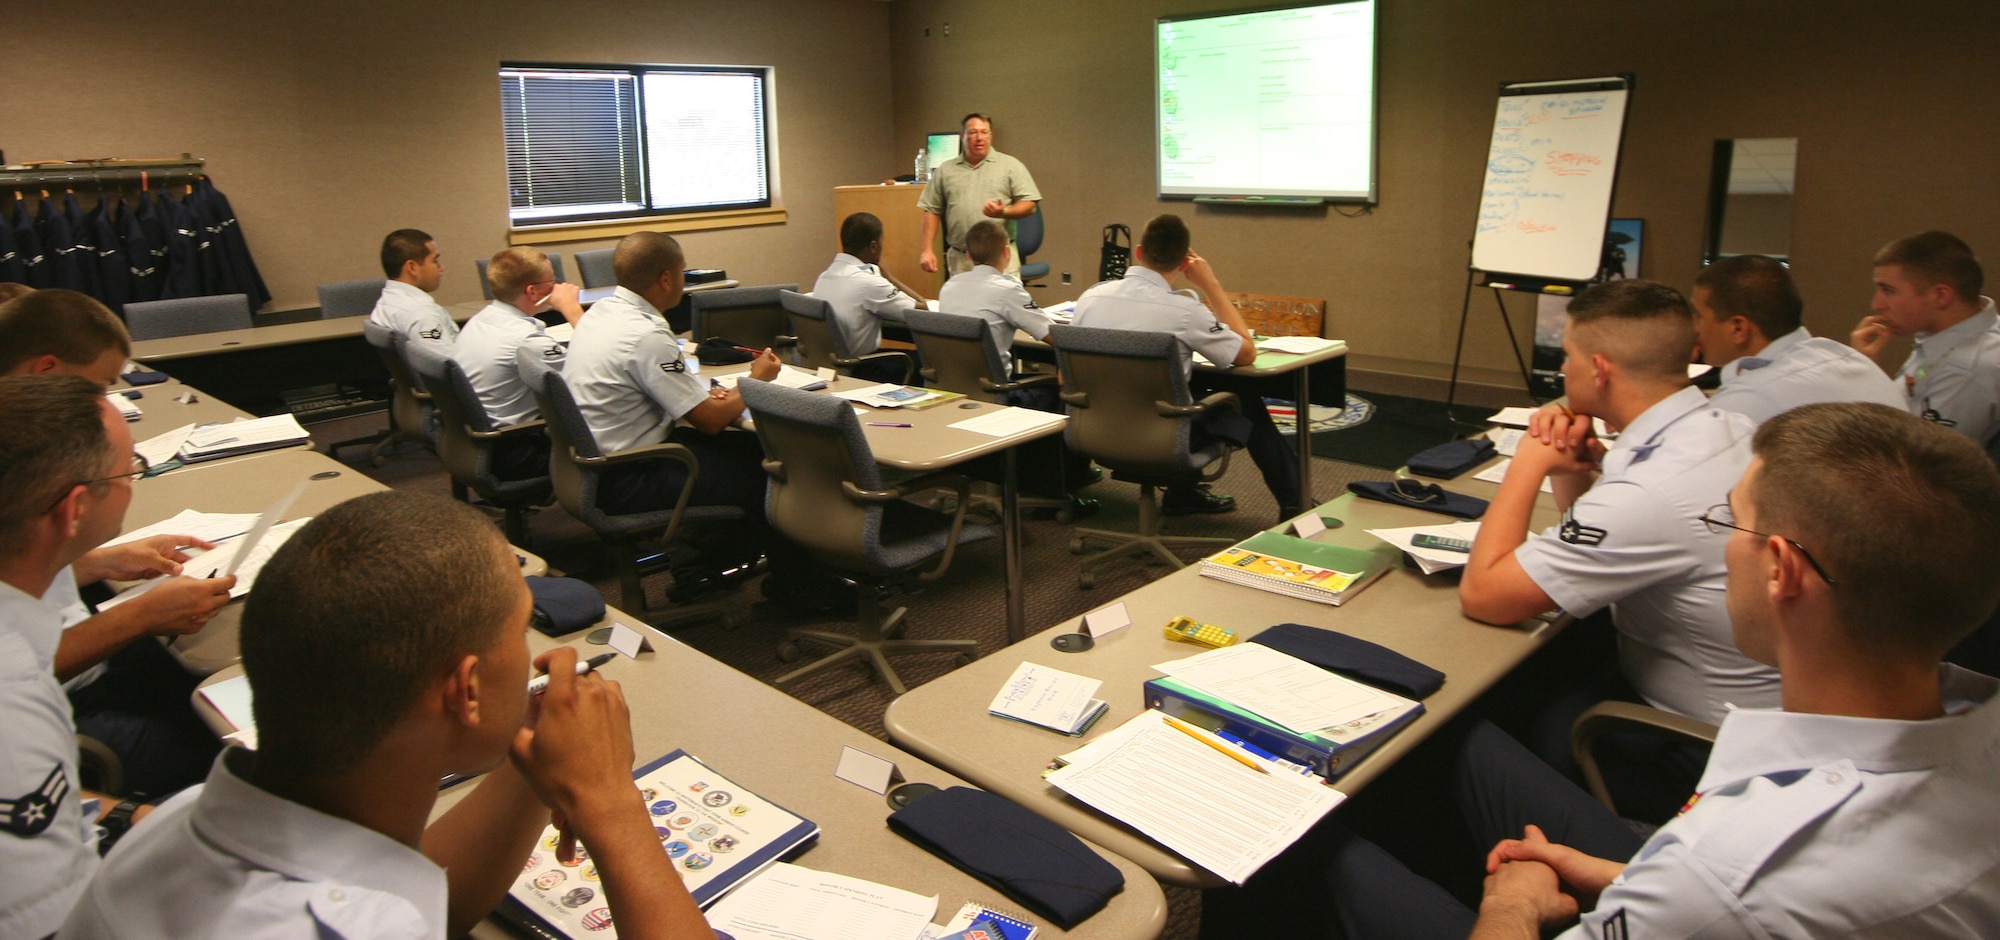 R.D. “Smitty” Smith, Airman and Family Readiness Center, gives a financial management briefing to the FTAC class 07-J at the Professional Development Center June 6. (U.S. Air Force photo/Airman 1st Class Stephen Linch)